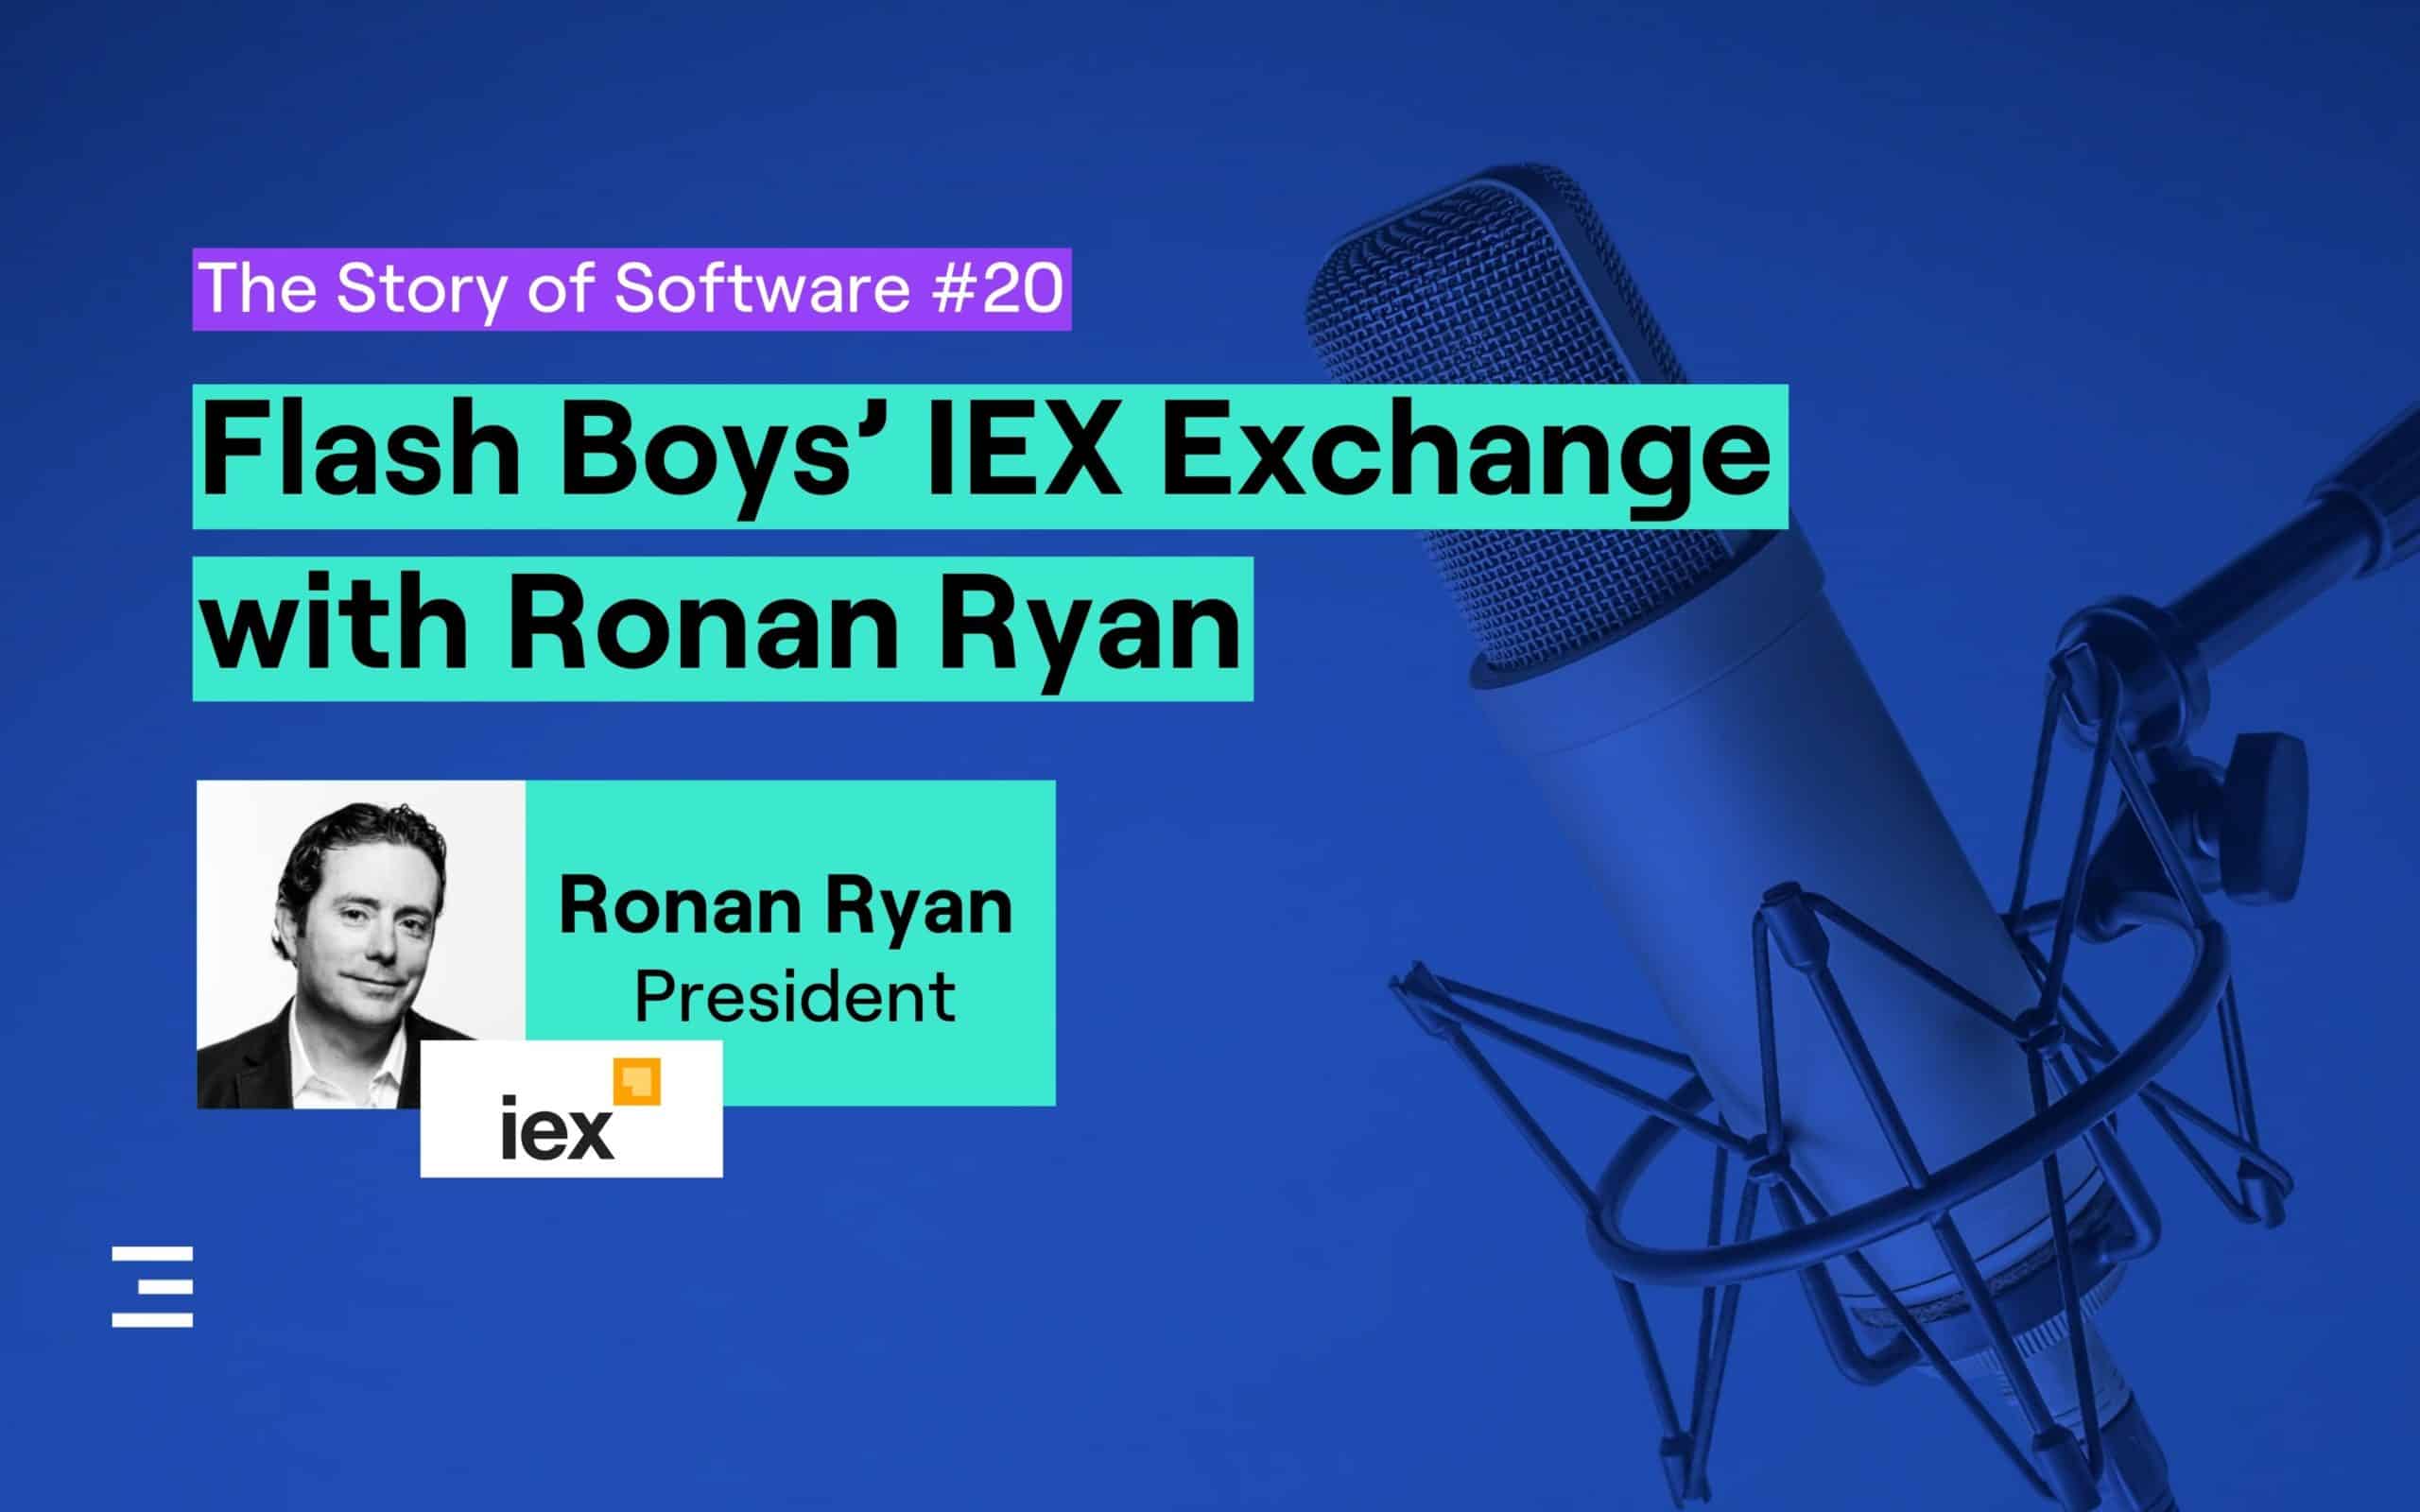 episode 20 of the story of software podcast: IEX Exchange and US stock exchange